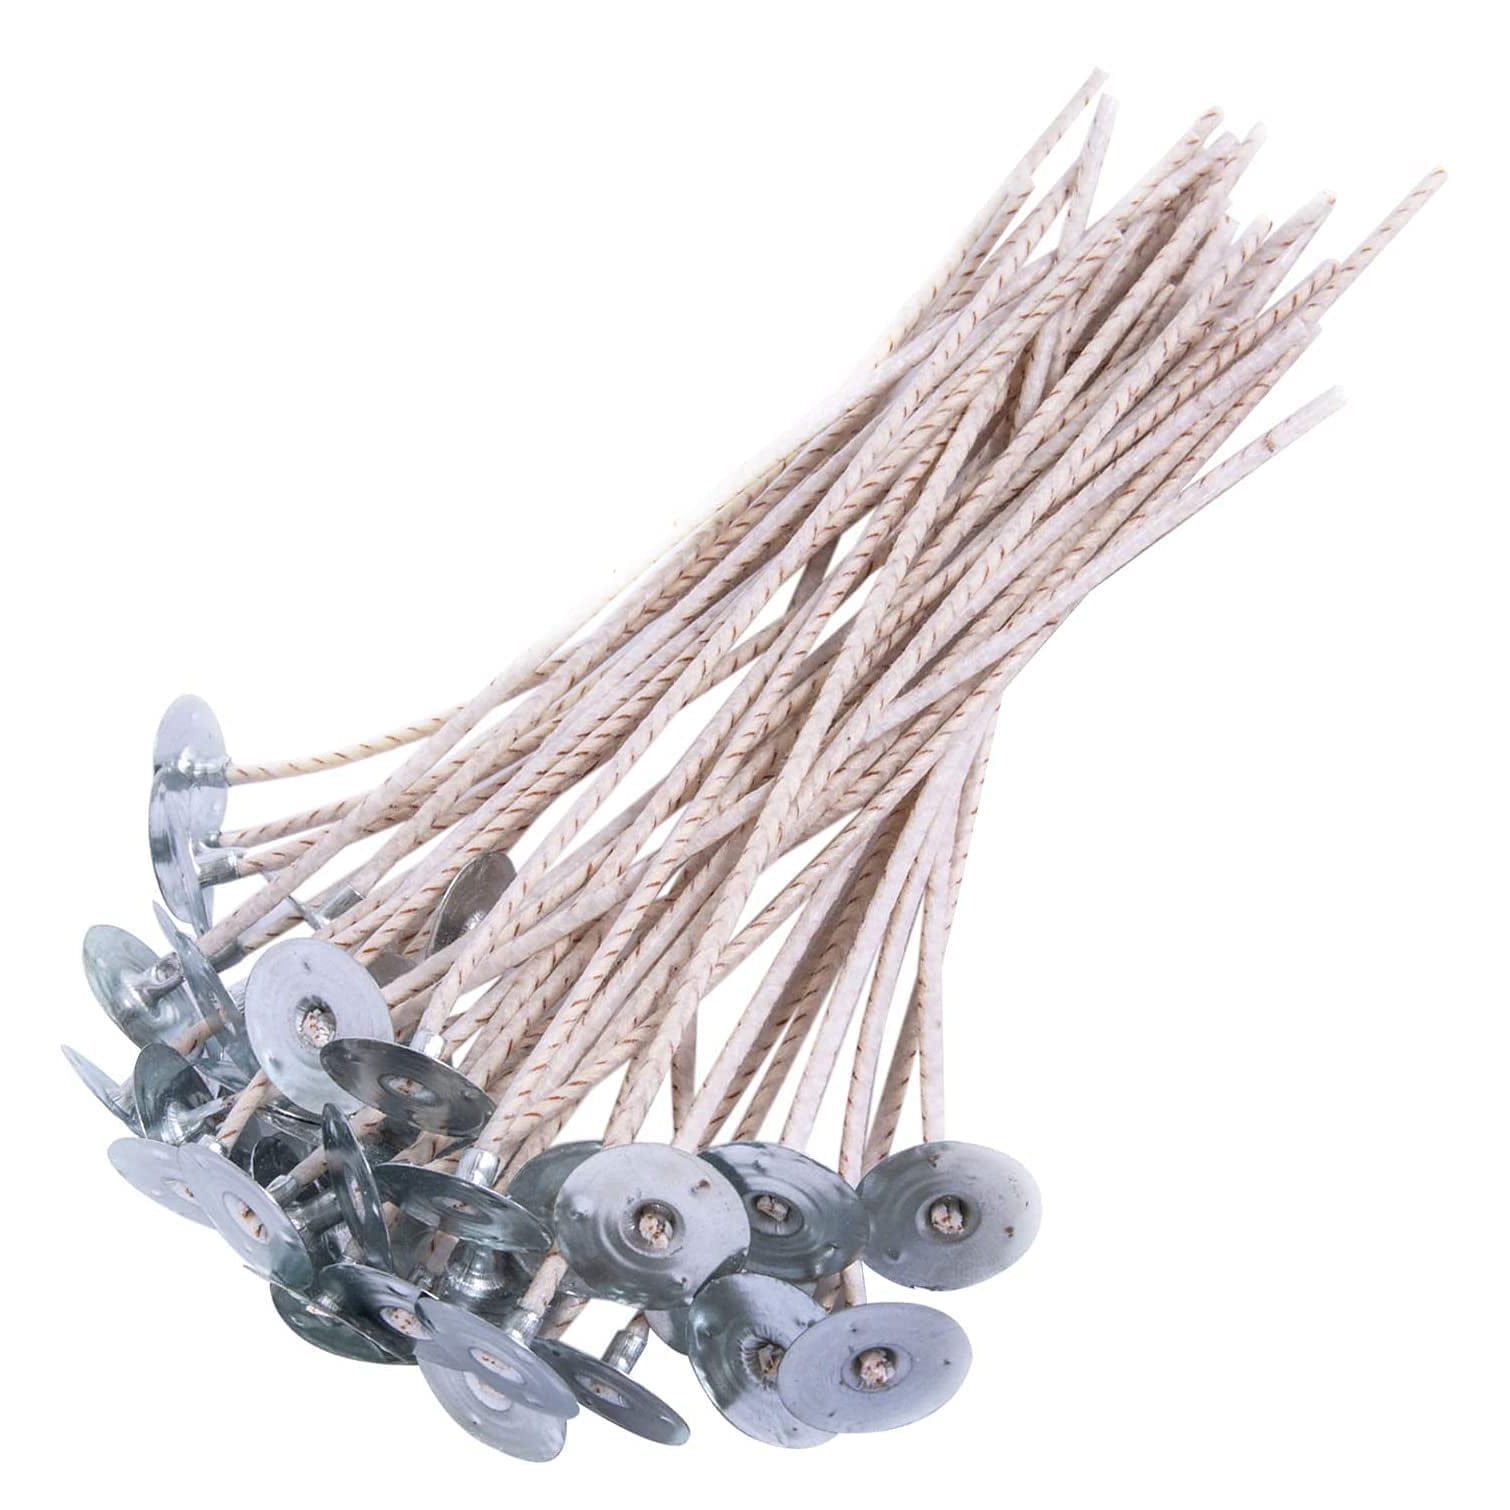 25 Pcs Pre Waxed Wicks with Tab 30 mm/ 3cm long for Candle Making High Quality 